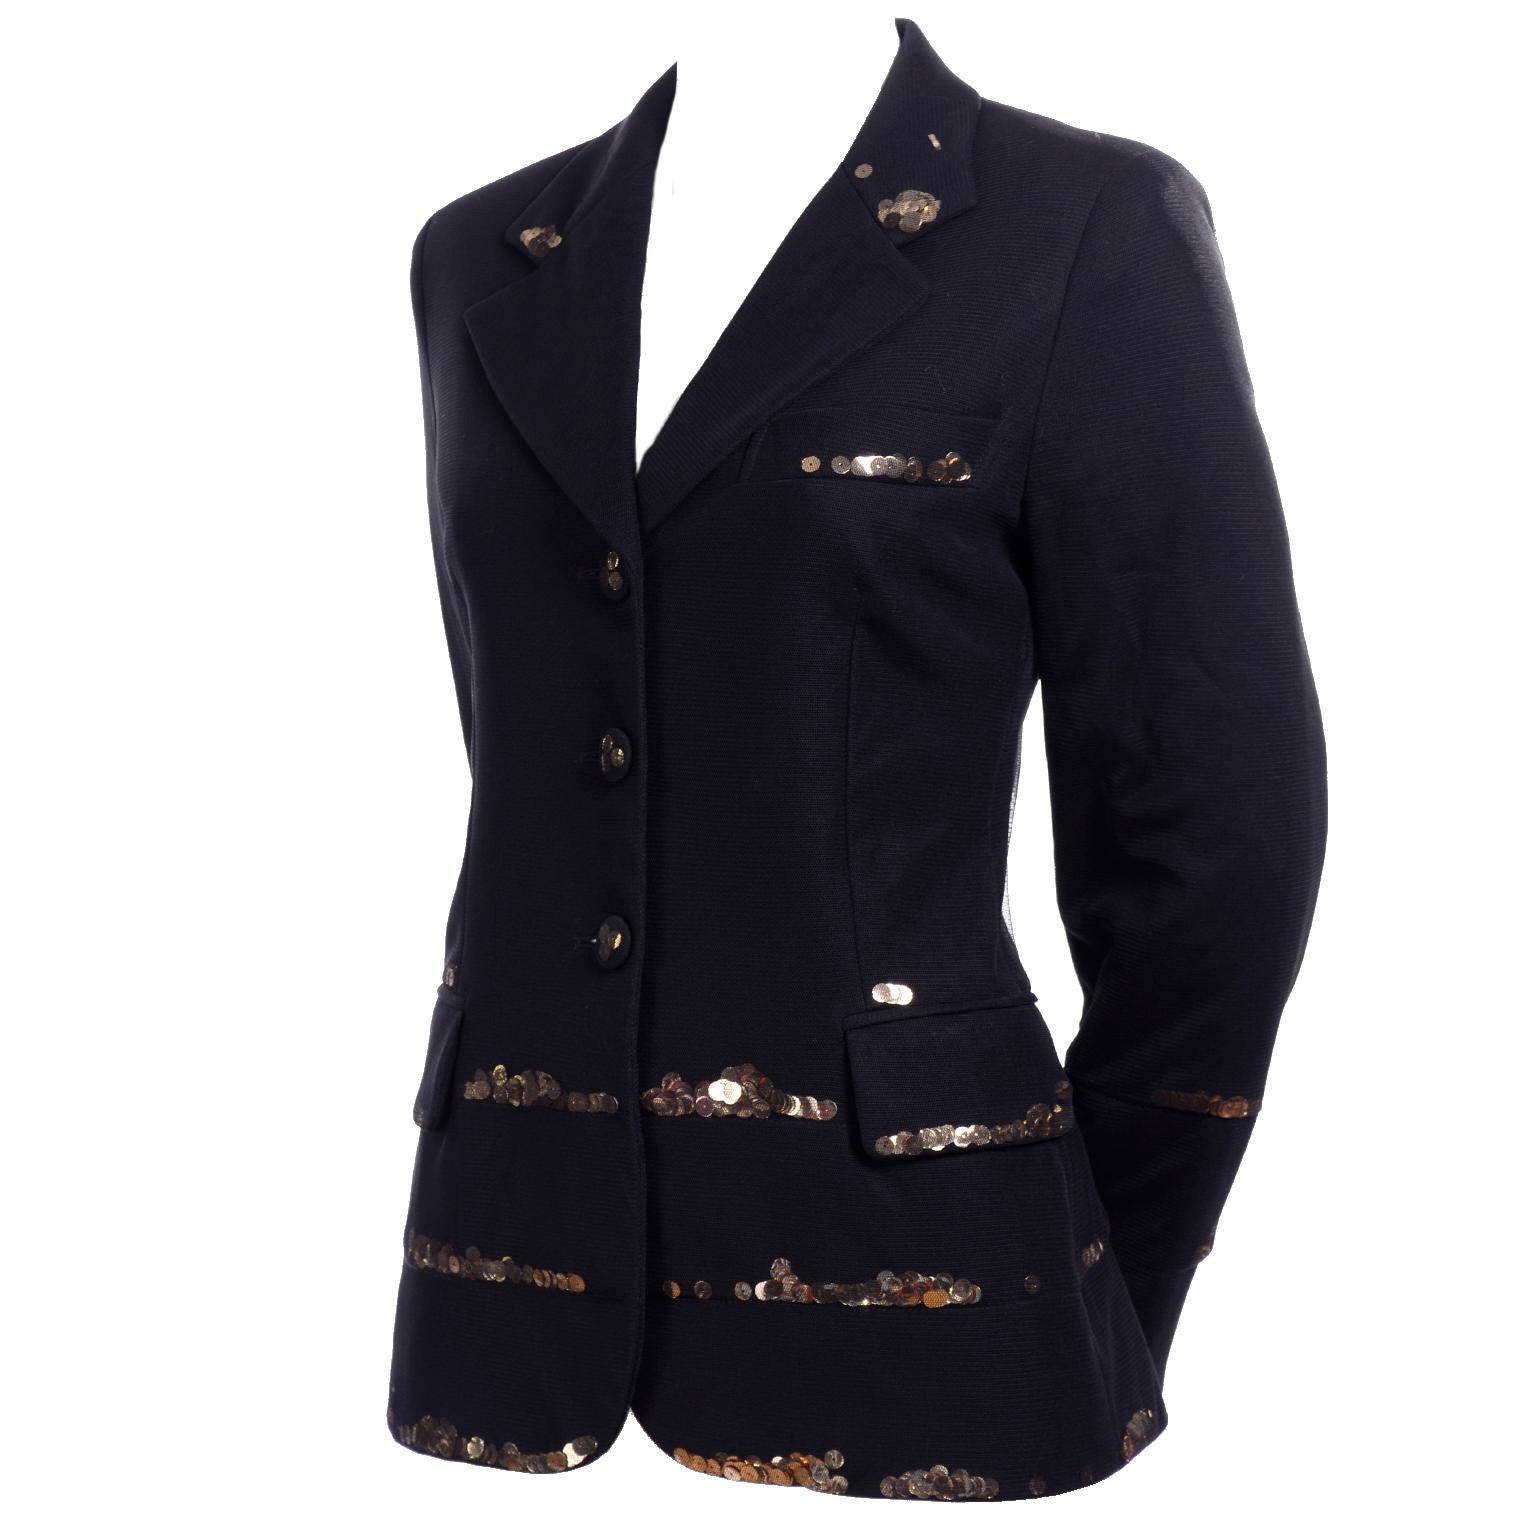 Vintage Moschino Black Blazer With Fine Netting and Gold Sequins